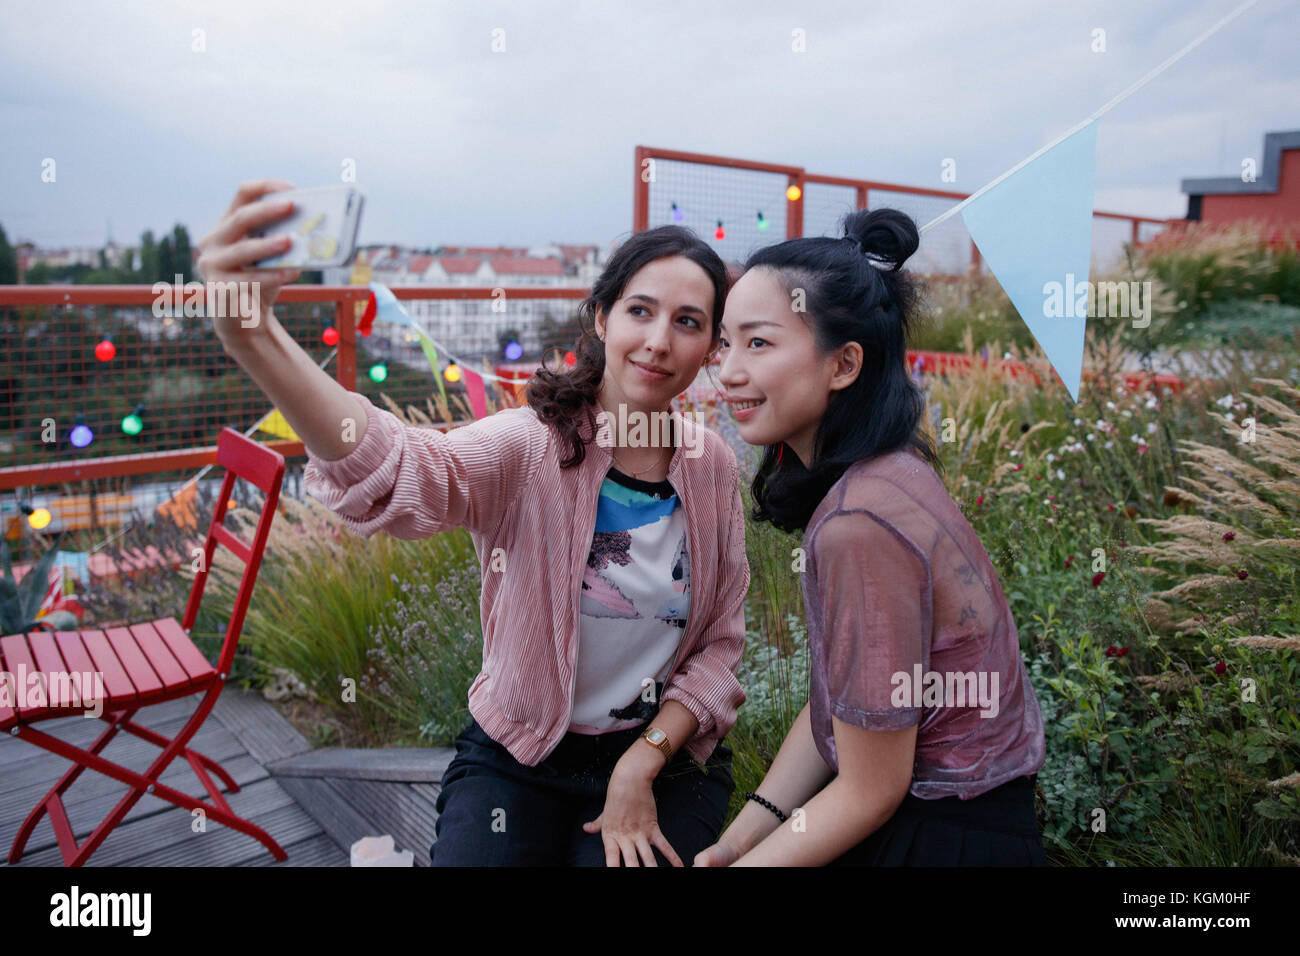 Smiling women taking selfie with smart phone on patio Stock Photo